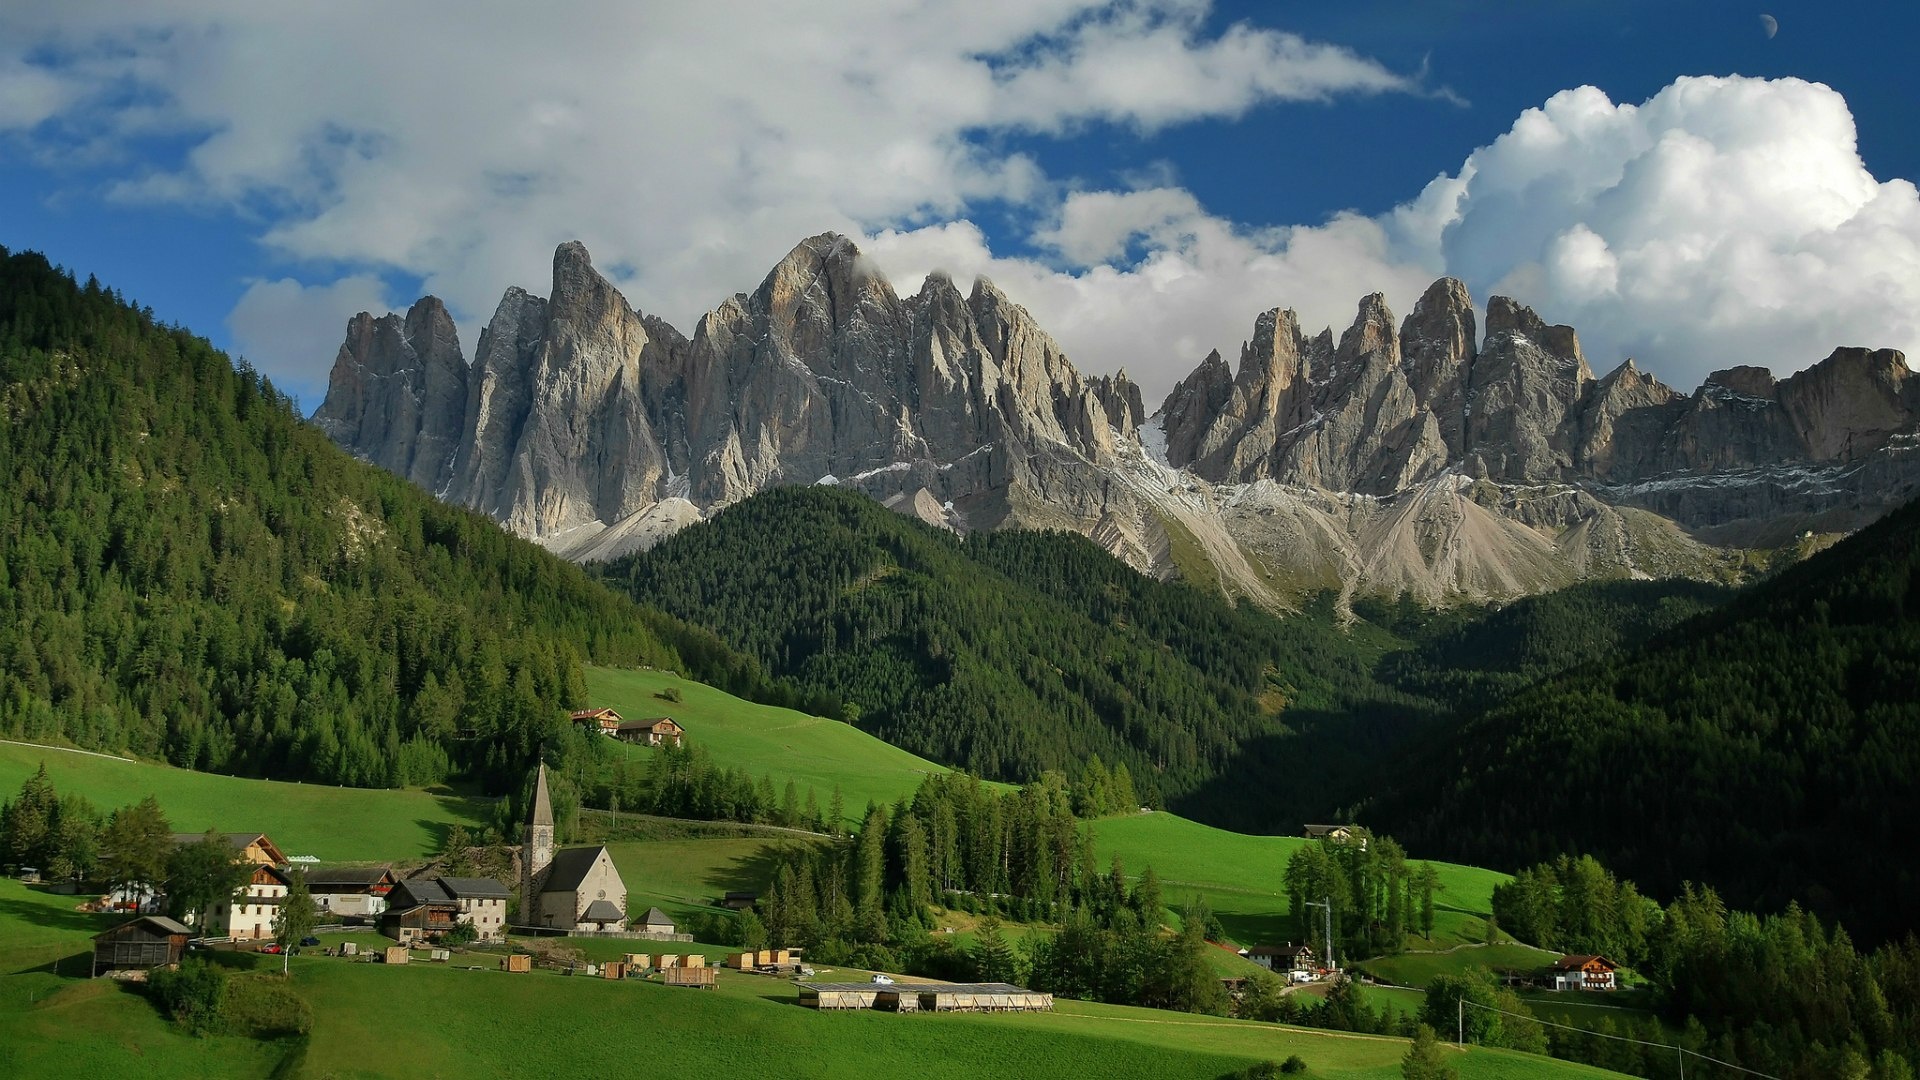 Dolomites wallpapers, Stunning backgrounds, Majestic peaks, Natural beauty, 1920x1080 Full HD Desktop